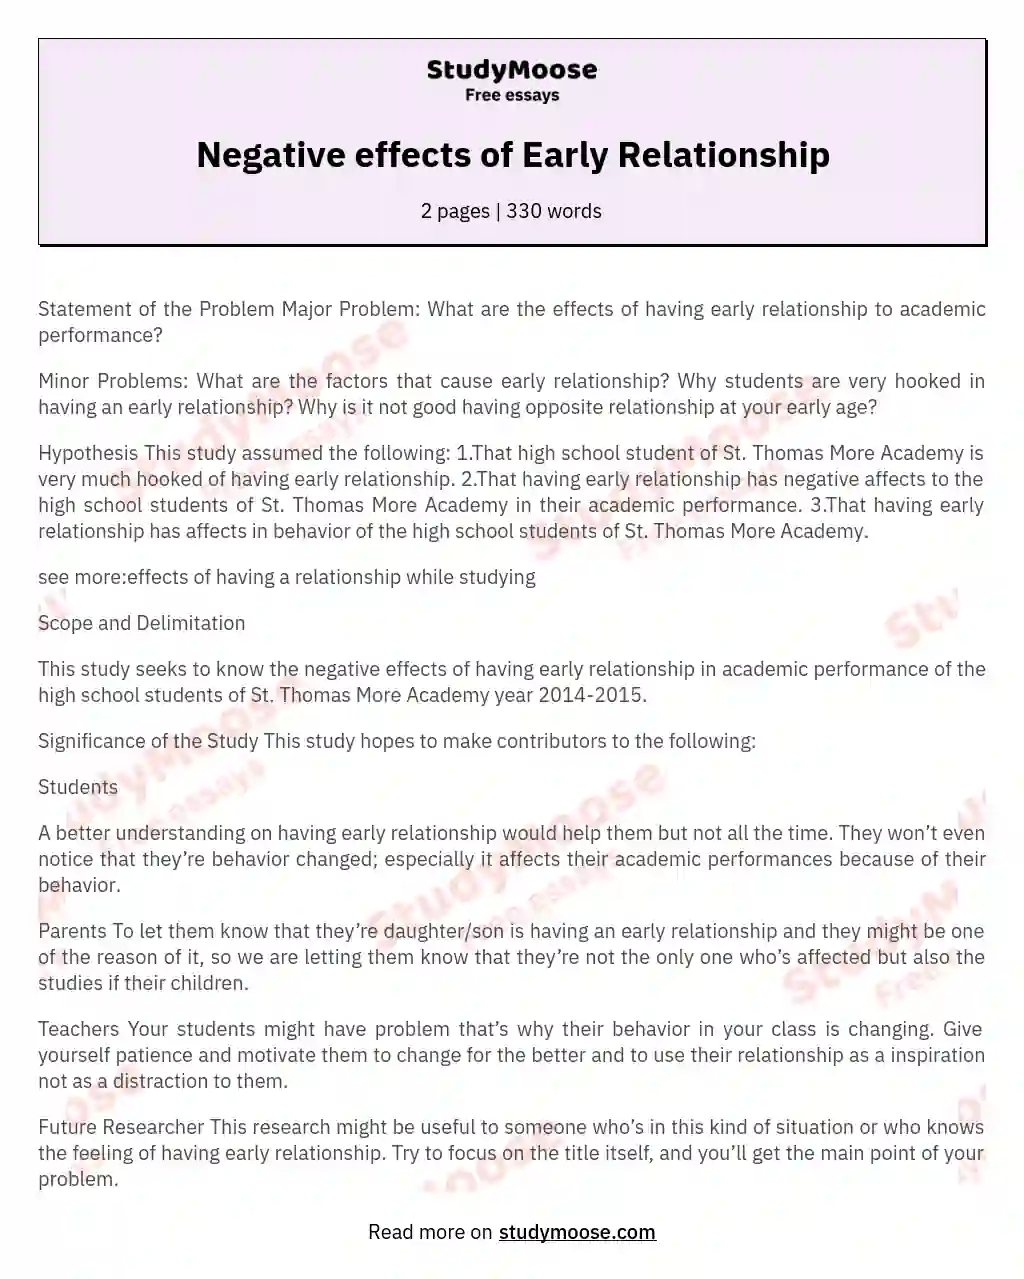 Negative effects of Early Relationship essay